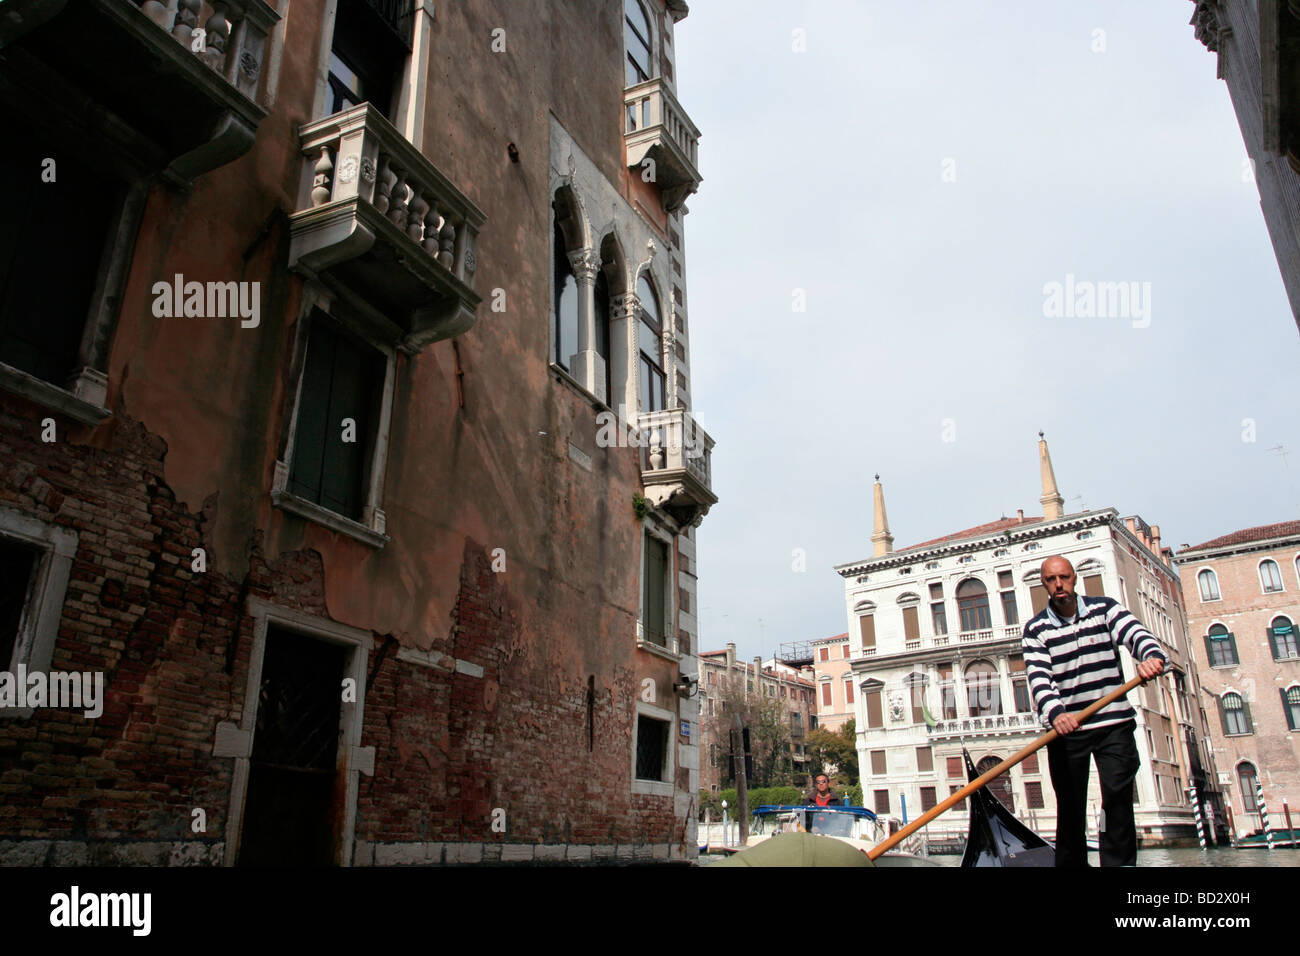 Buildings along canal in Venice. Stock Photo